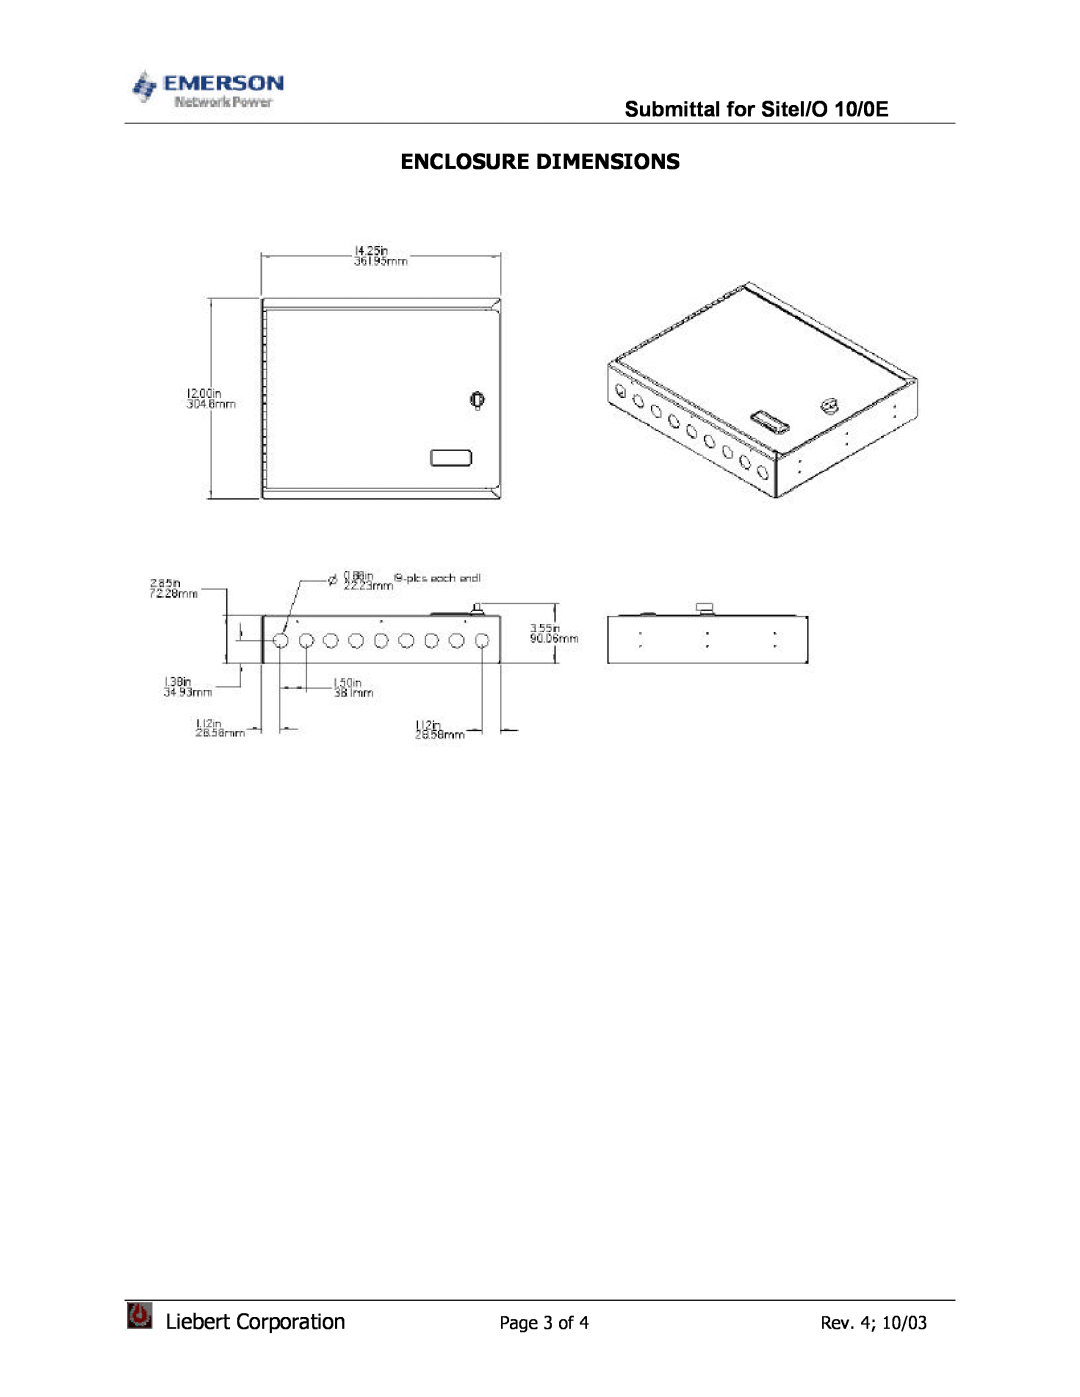 Emerson Network Power Enclosure Dimensions, Submittal for SiteI/O 10/0E, Liebert Corporation, Page 3 of, Rev. 4 10/03 